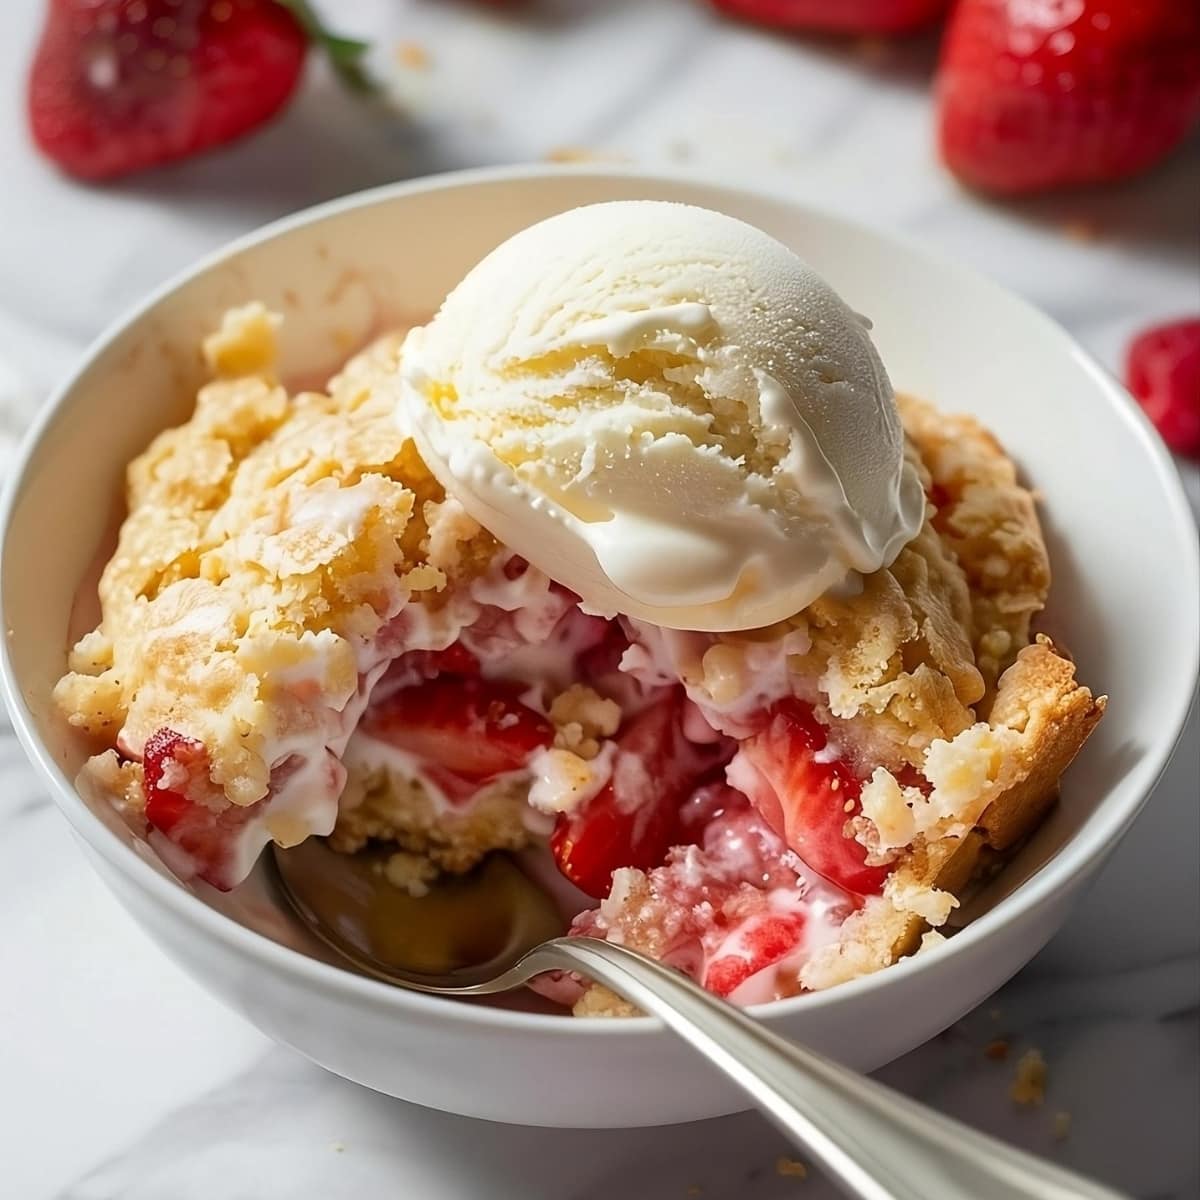 Strawberry dump cake served with scoop of vanilla ice cream on top in a white bowl with spoon.